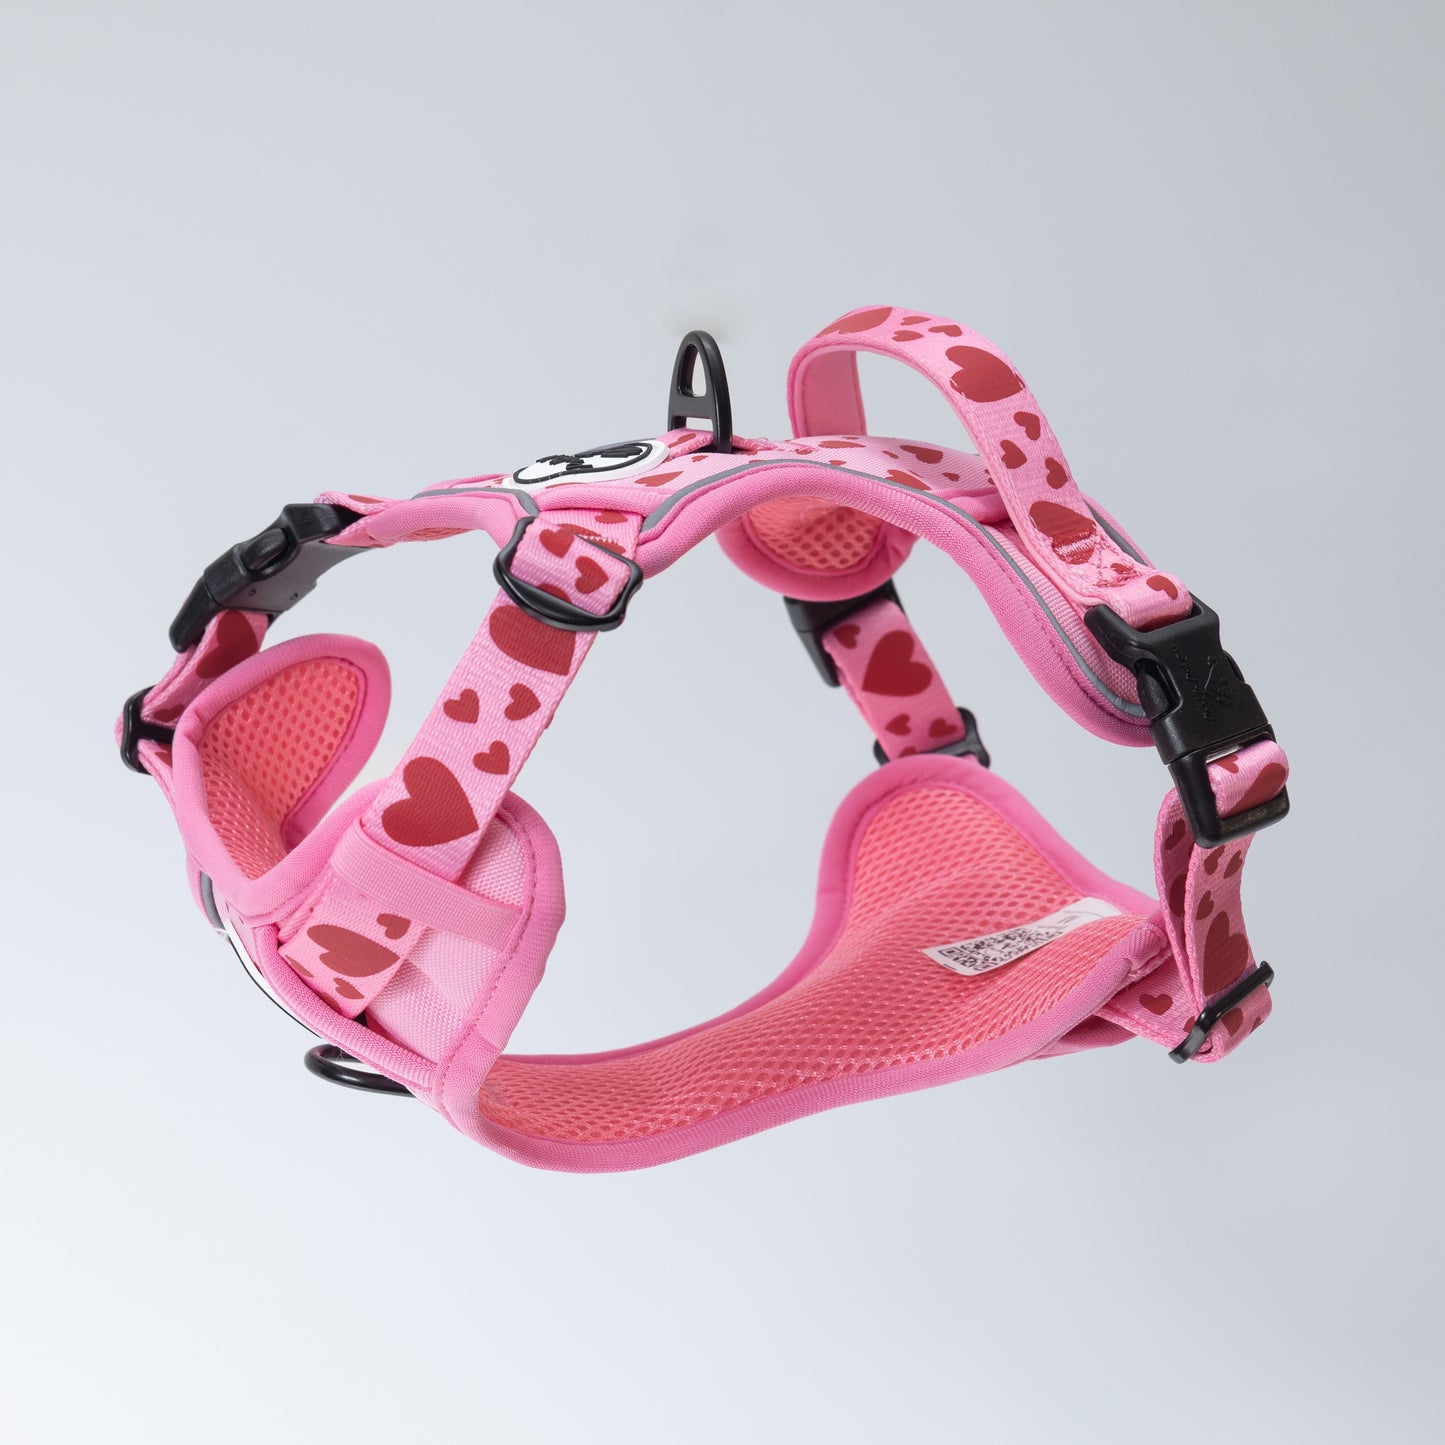 Reflective Comfort Explorer Harness with Heart Patterns | Adjustable Harness | Pookie Pets